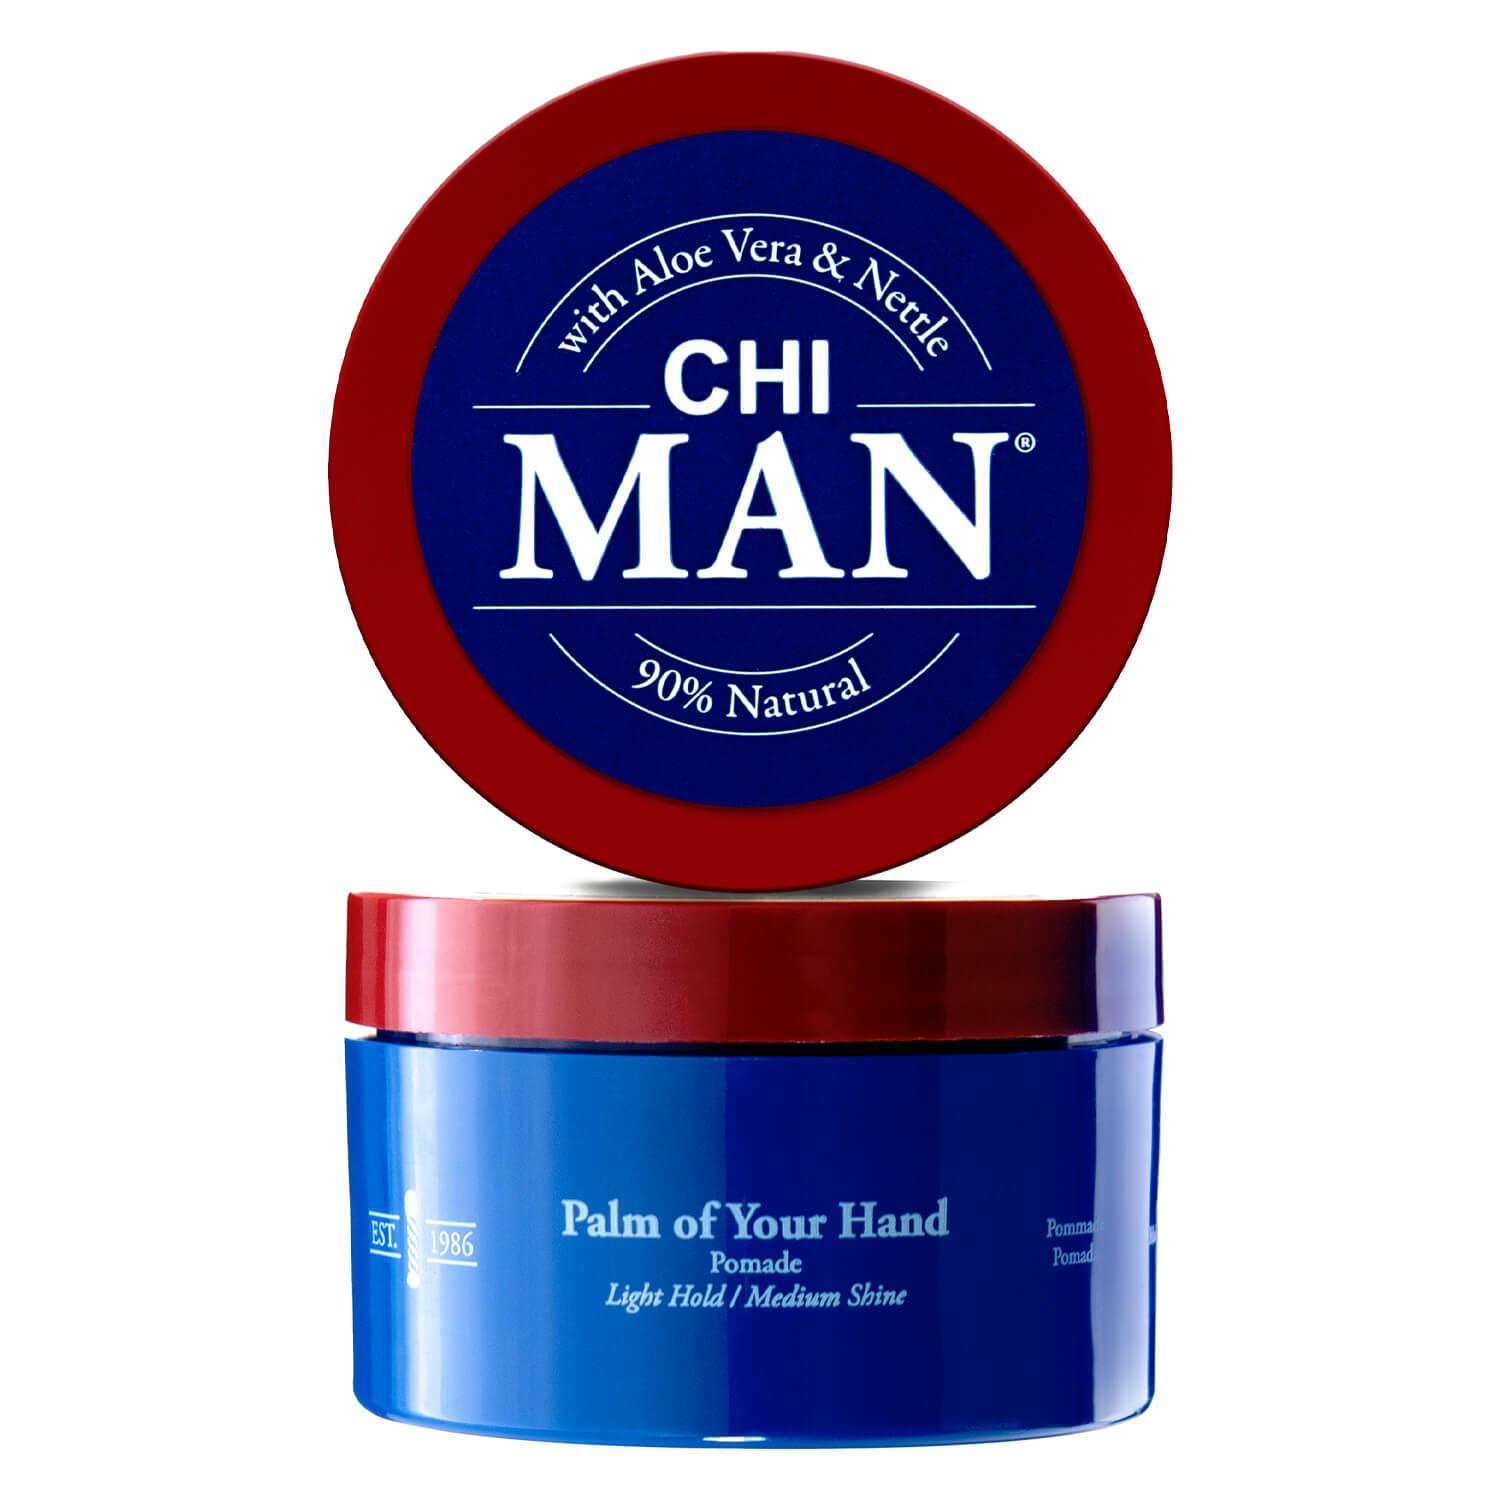 Palm of your Hand Pomade